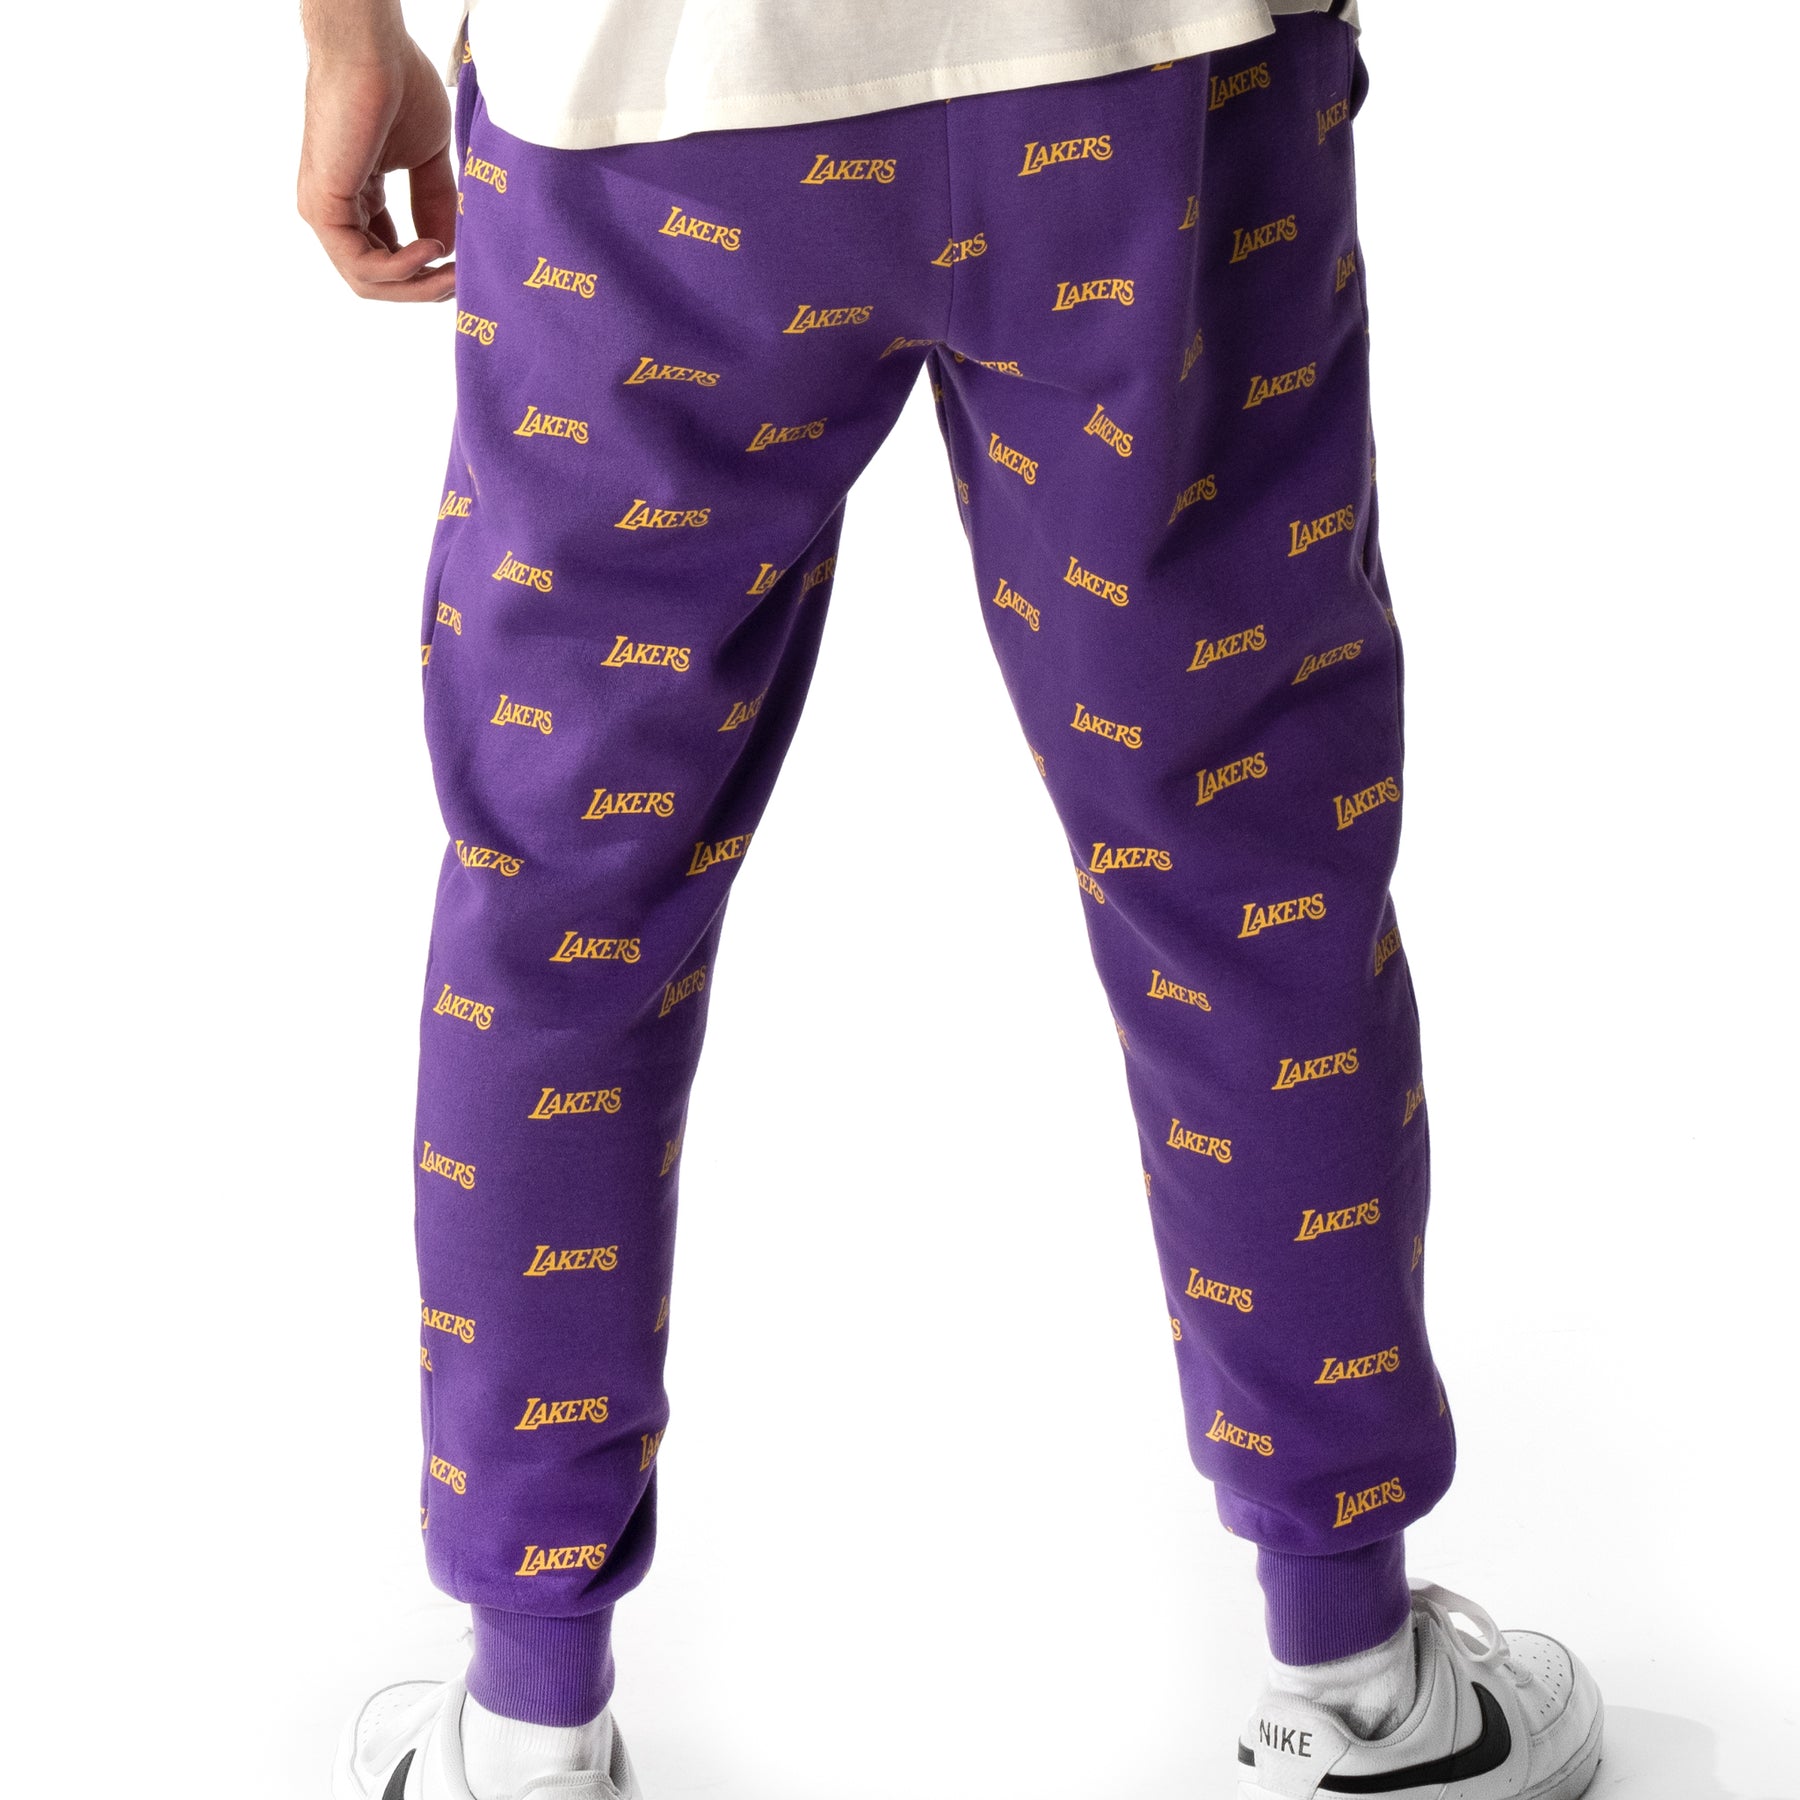 Los Angeles Lakers Joggers